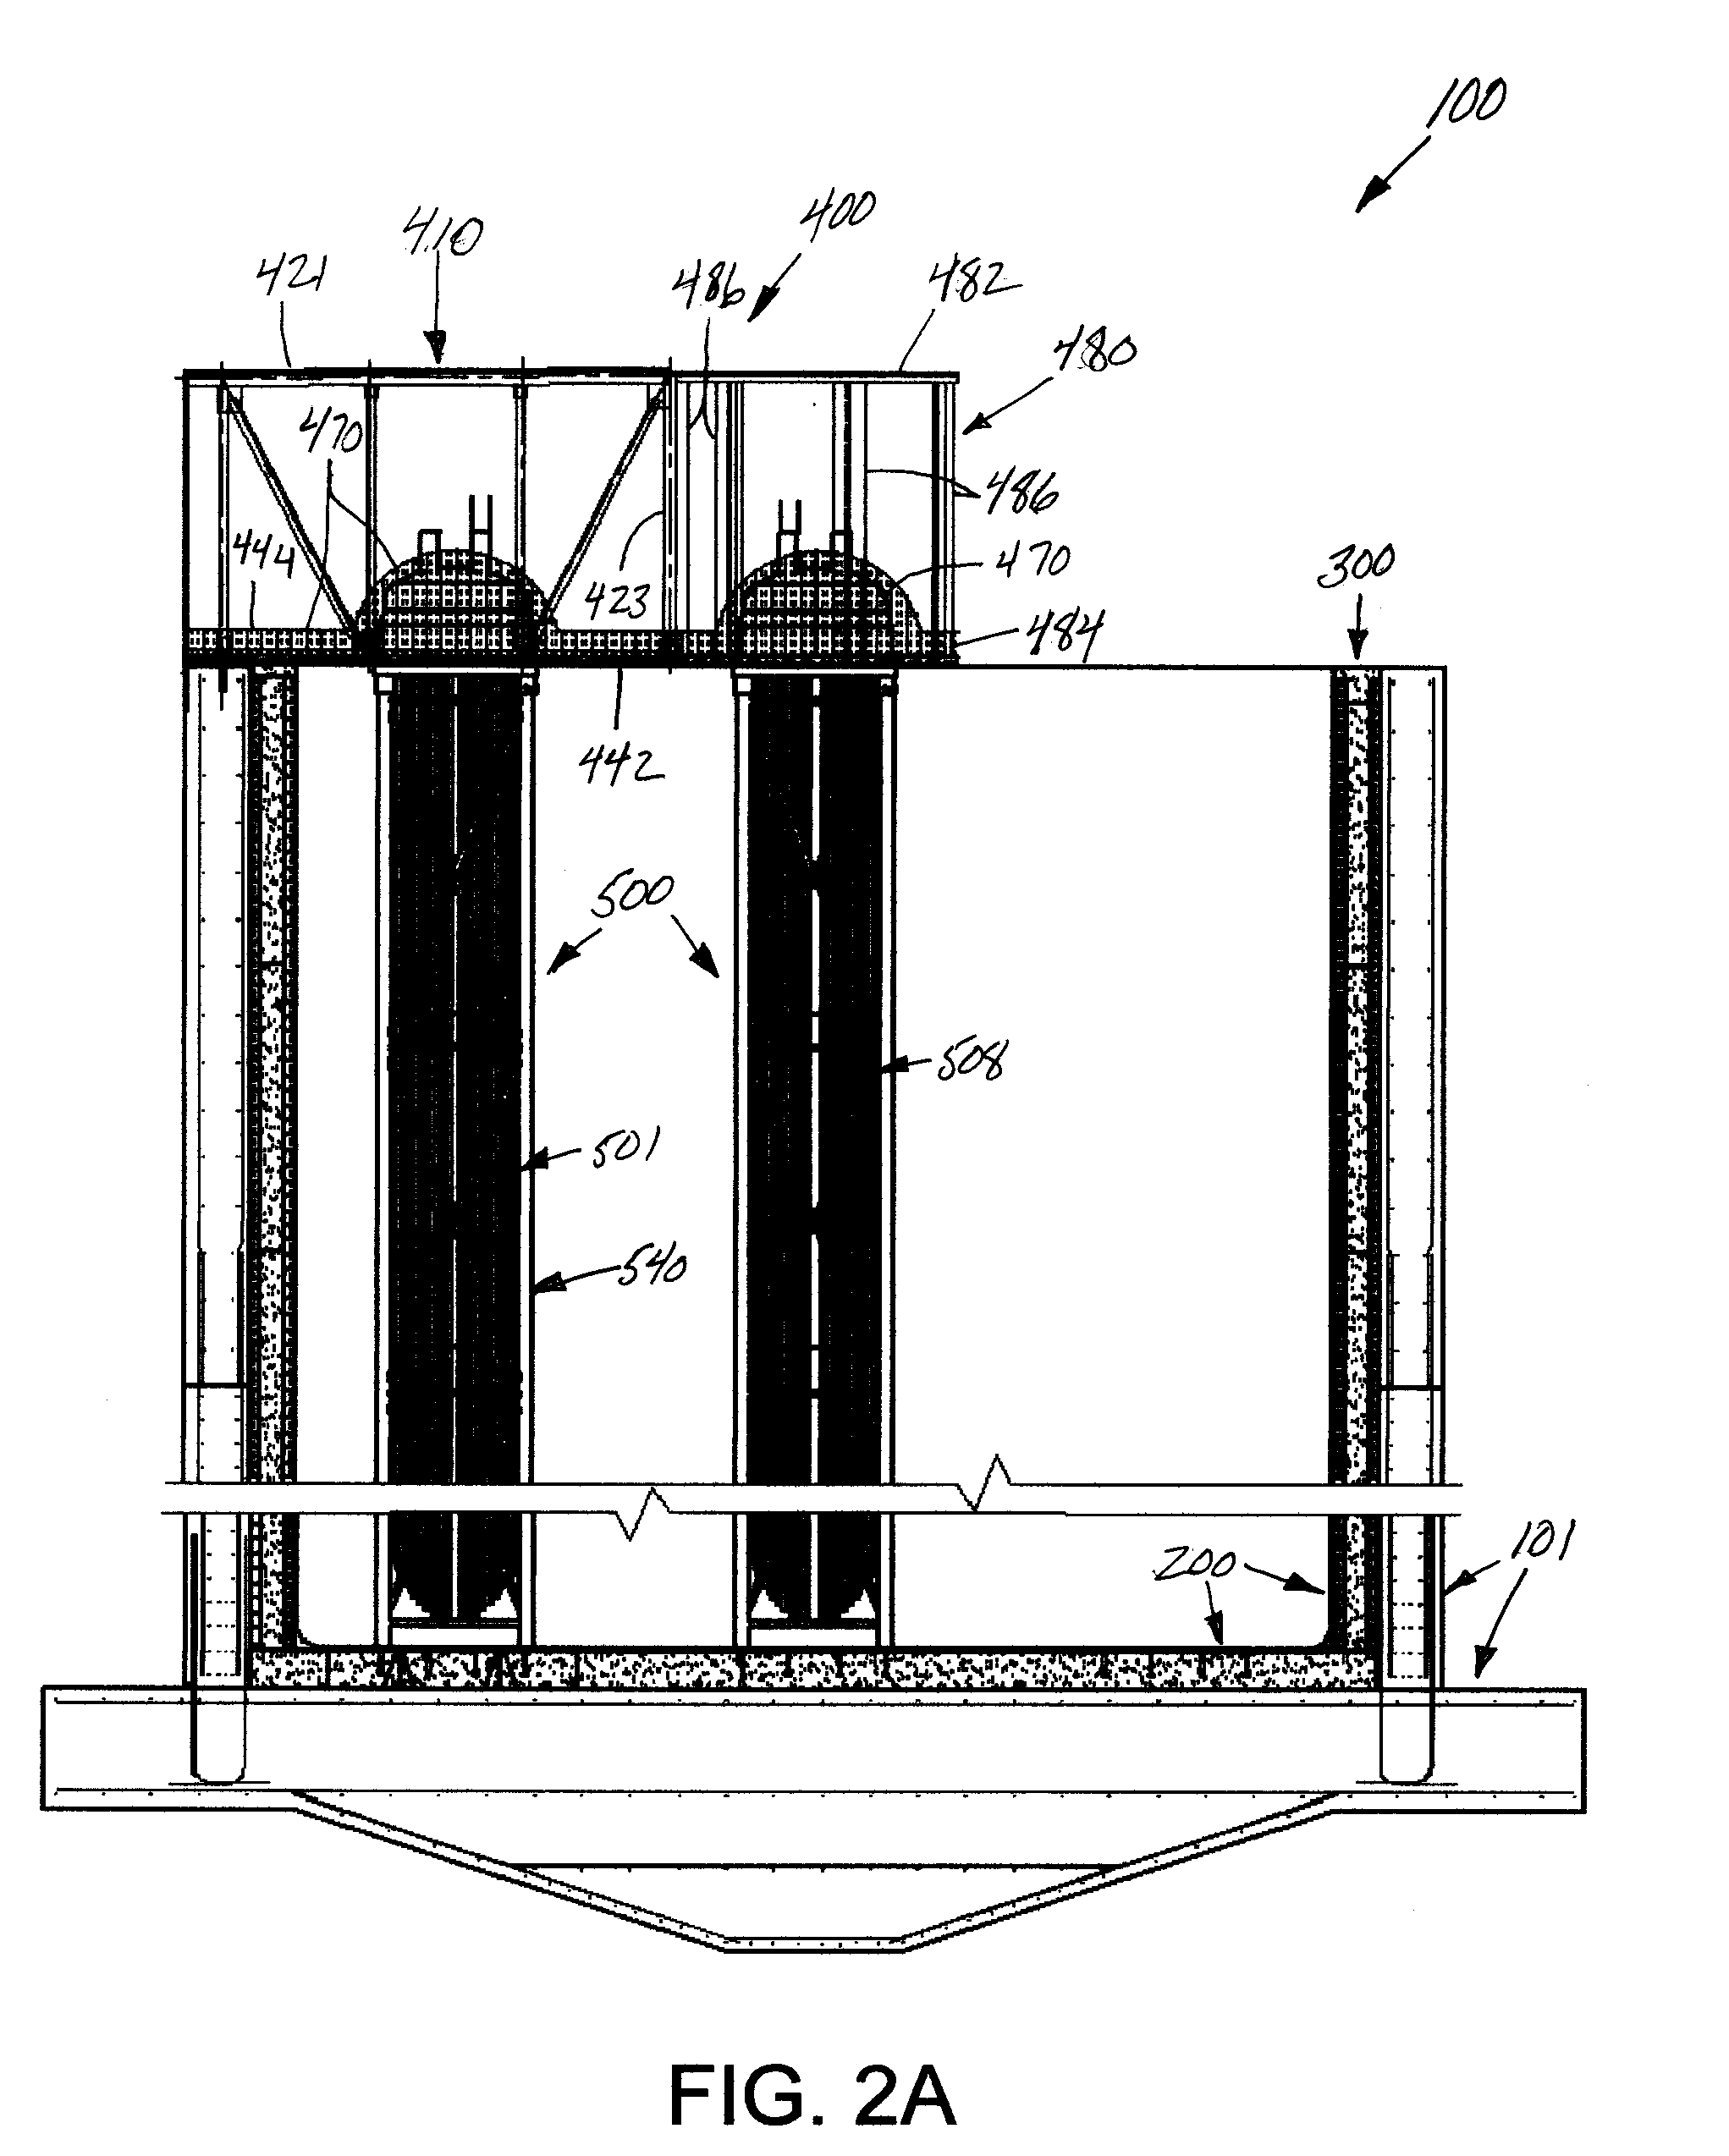 Thermal energy storage vessel, systems, and methods